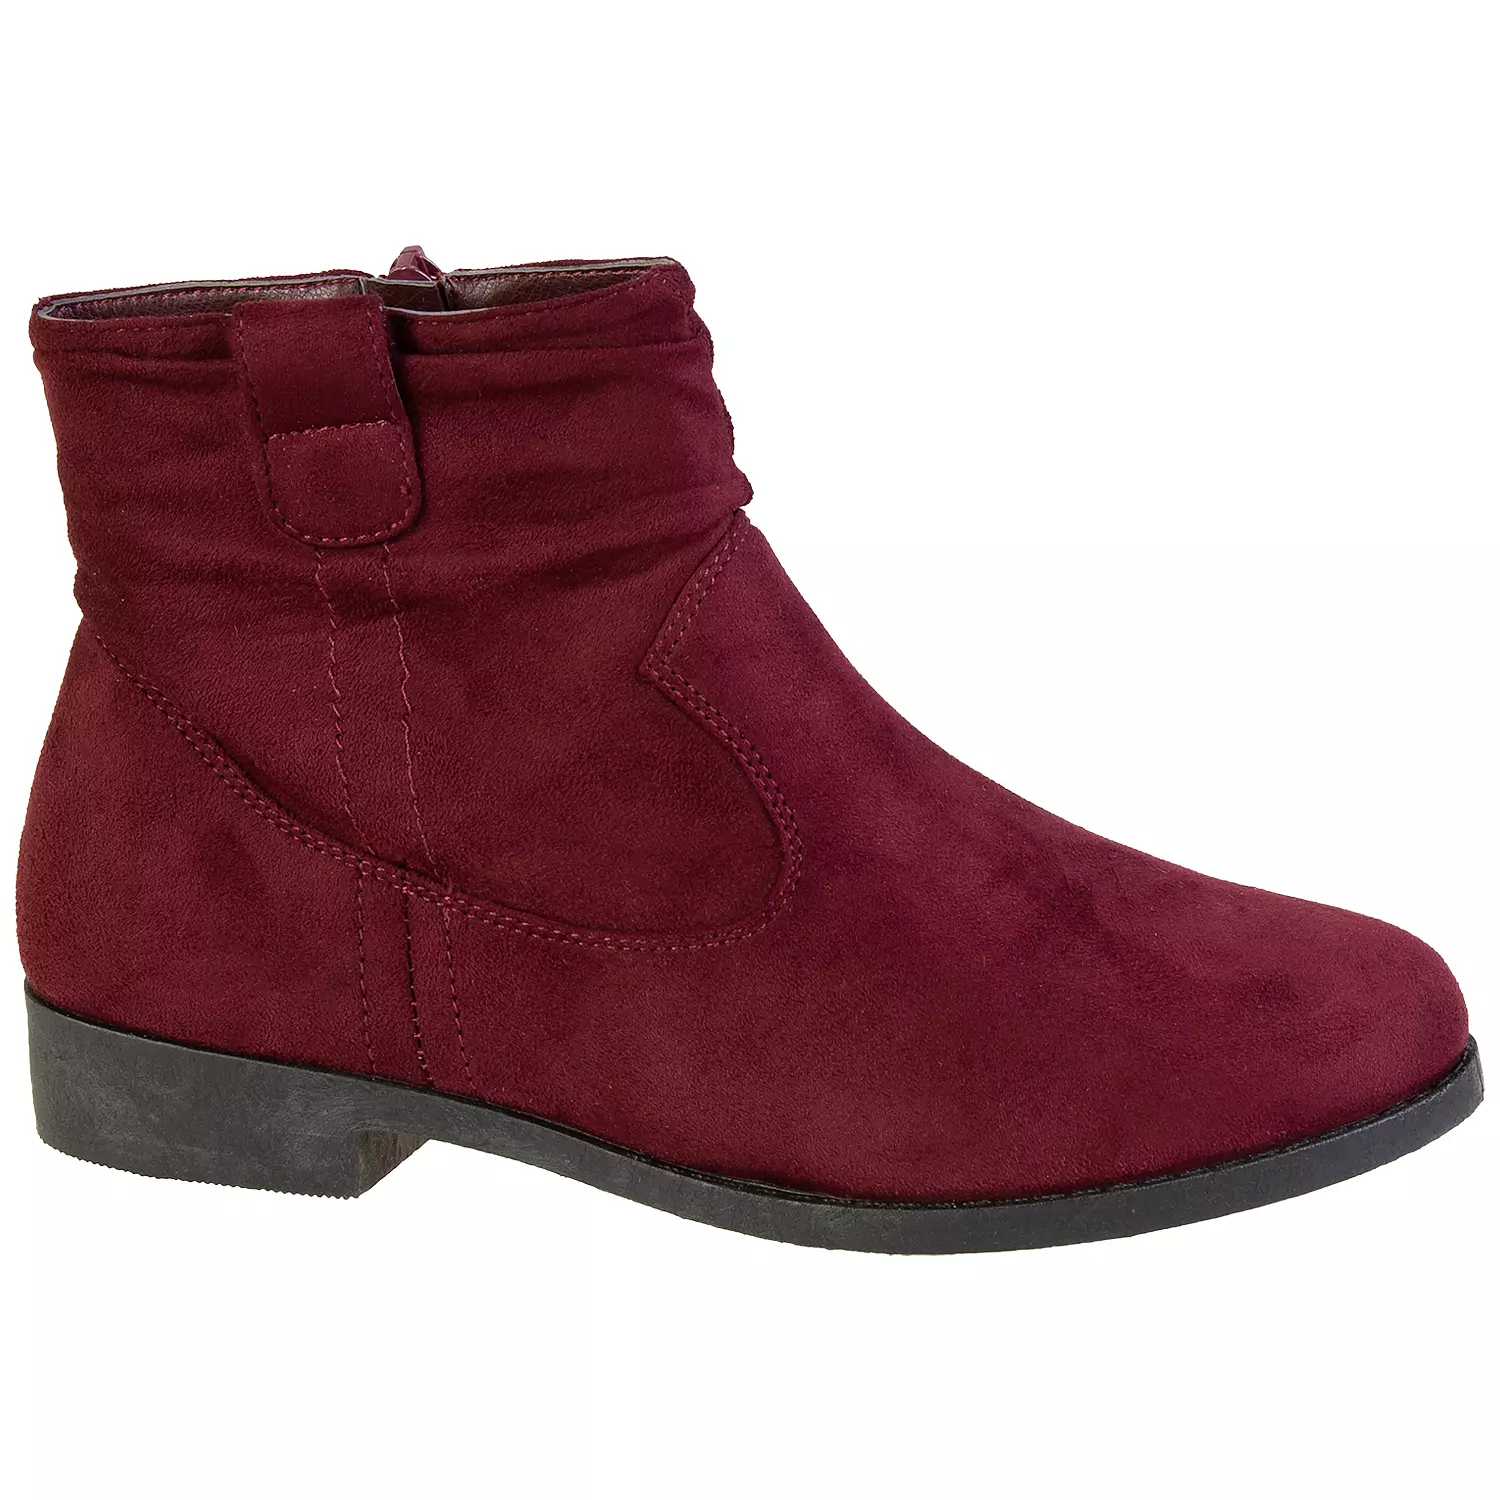 Women's slouch ankle boots with side tabs, burgundy, size 7